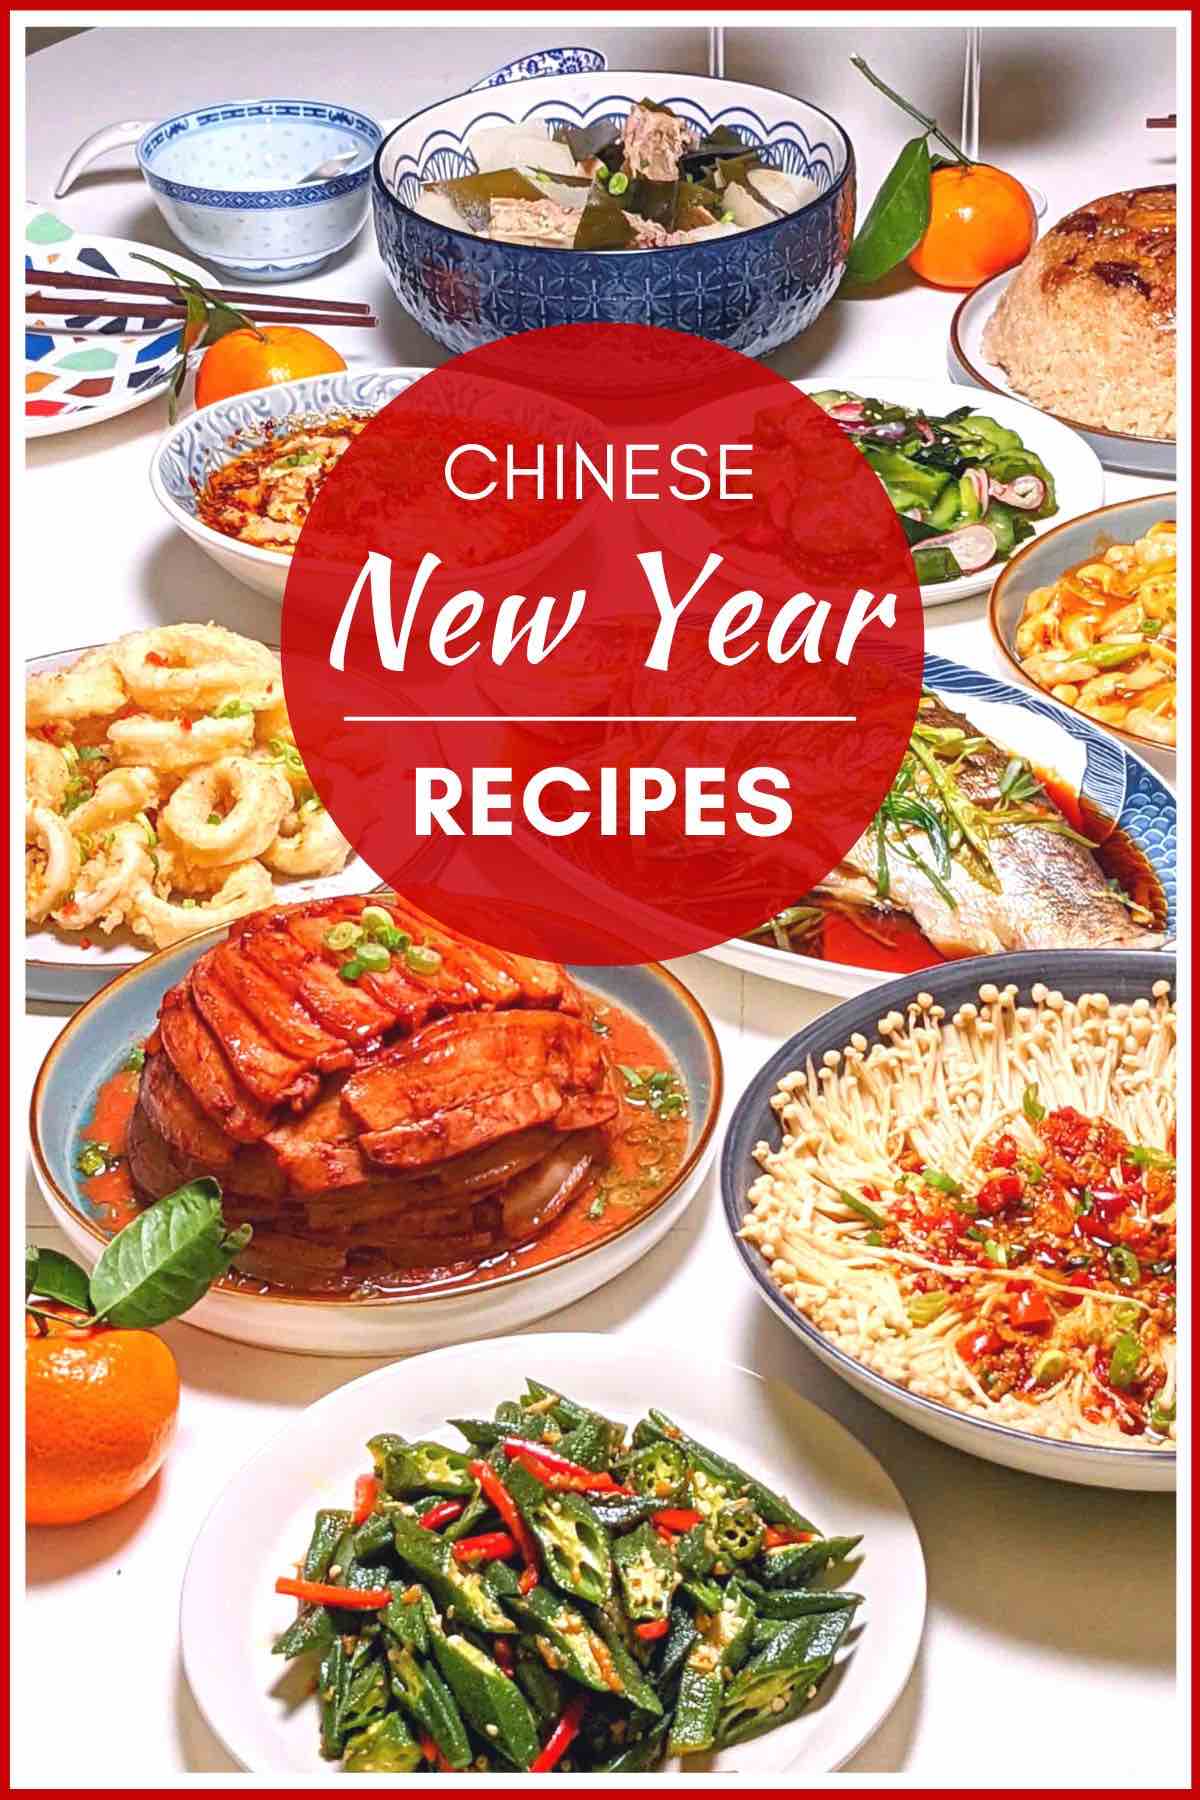 Multiple dishes on a table with overlay text that says Chinese new year recipes.